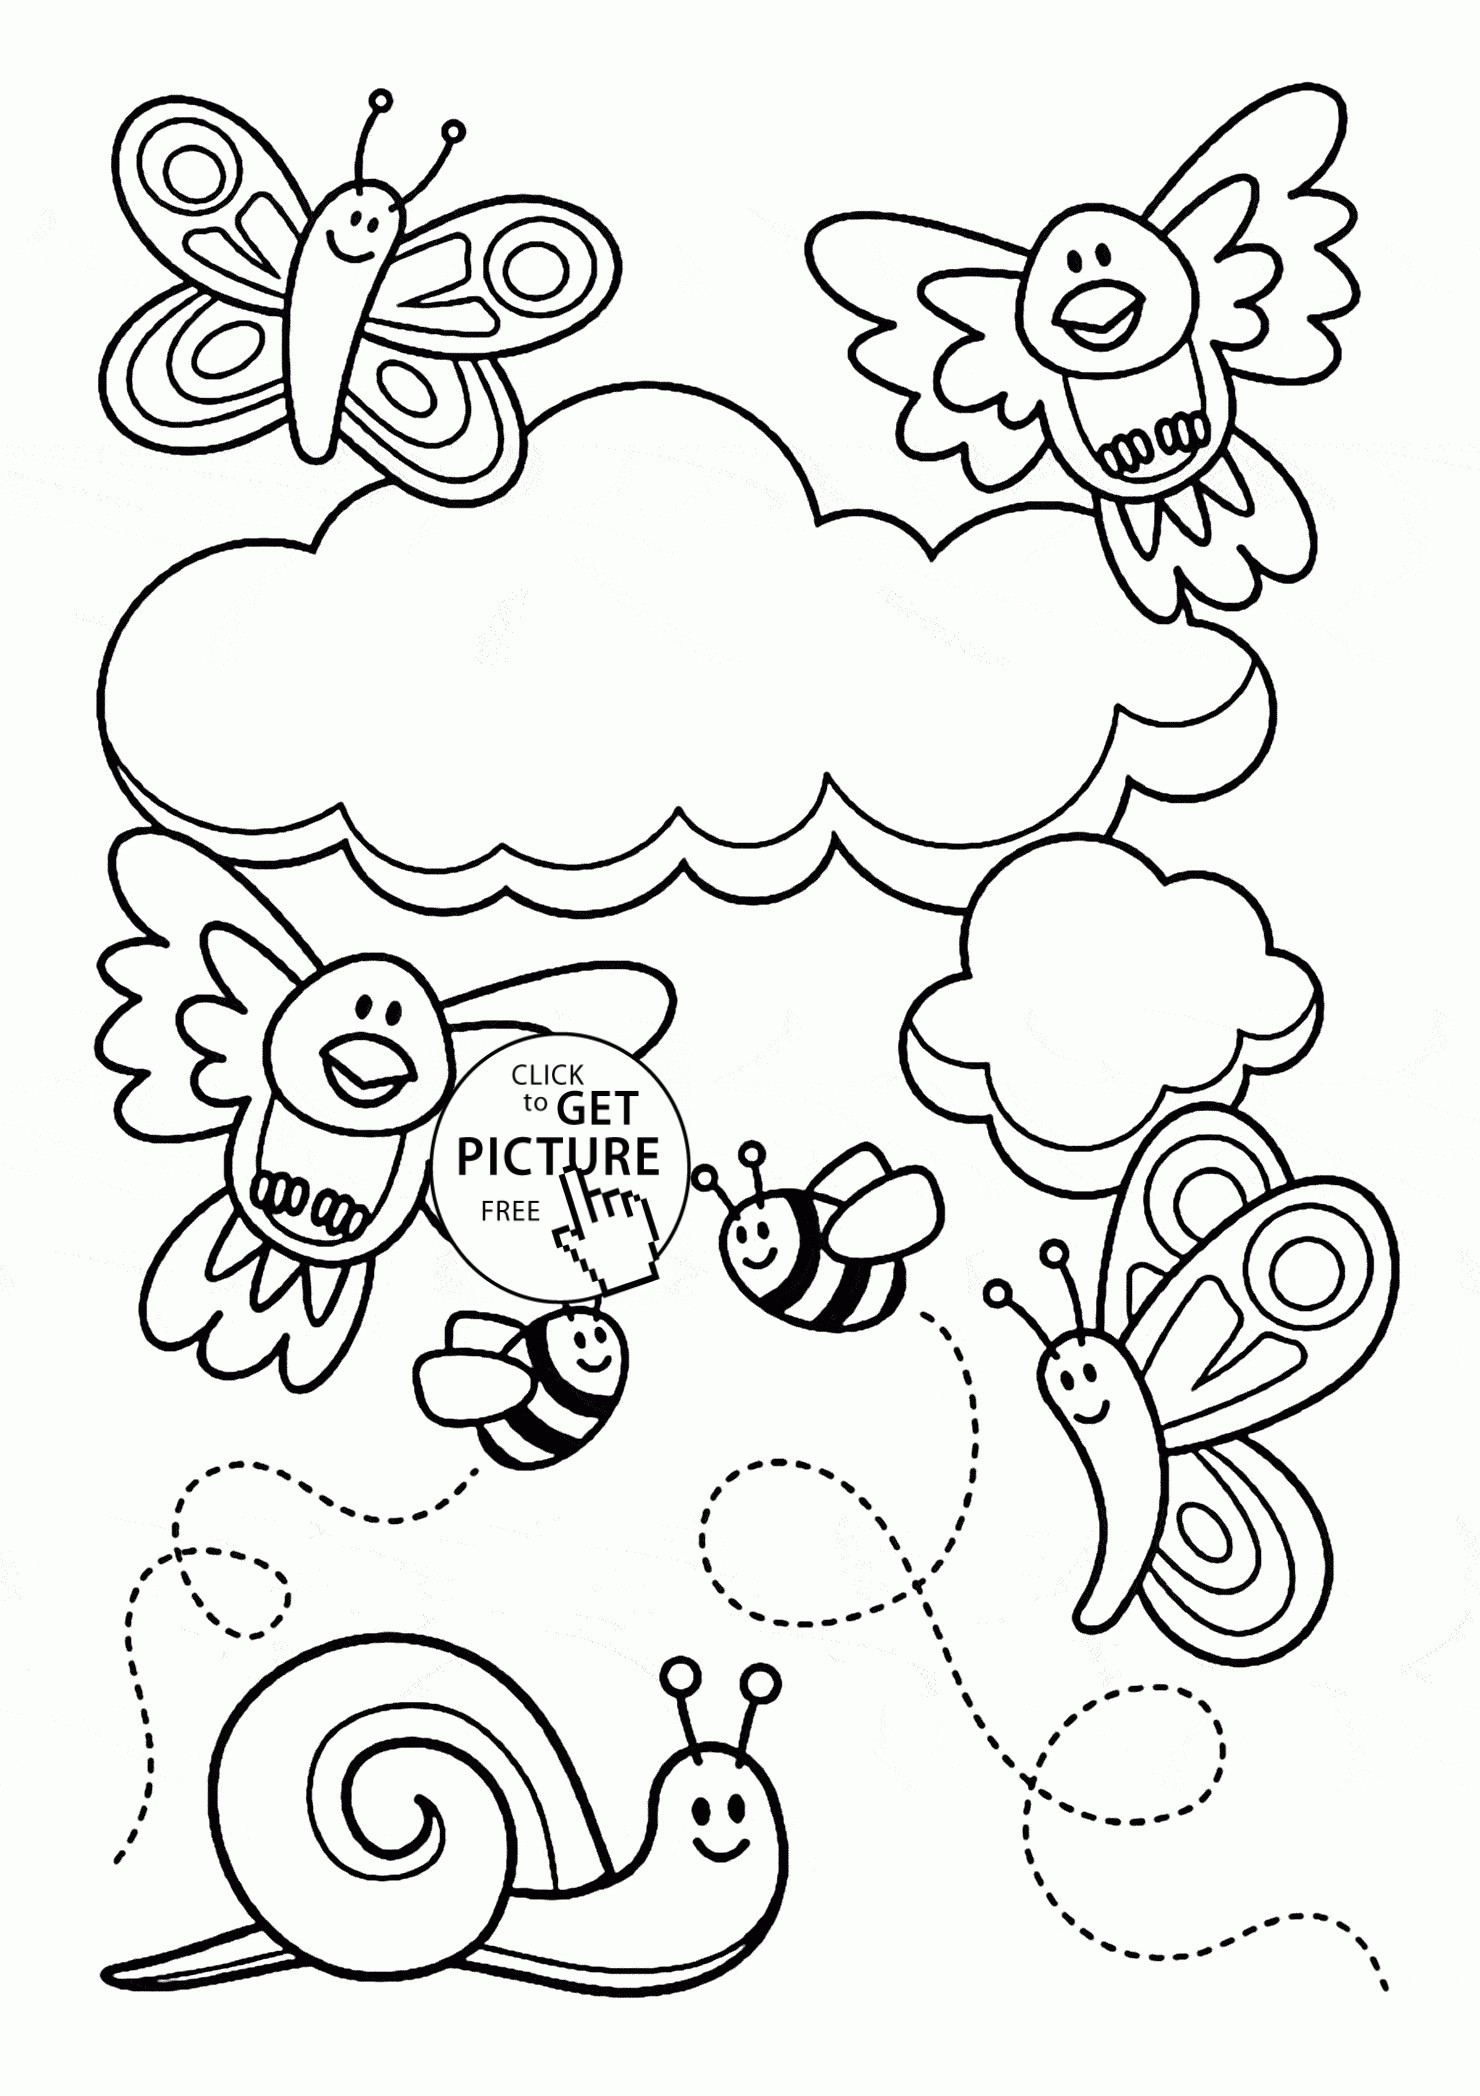 Printable Spring Coloring Pages
 Cute Spring Coloring Pages at GetColorings